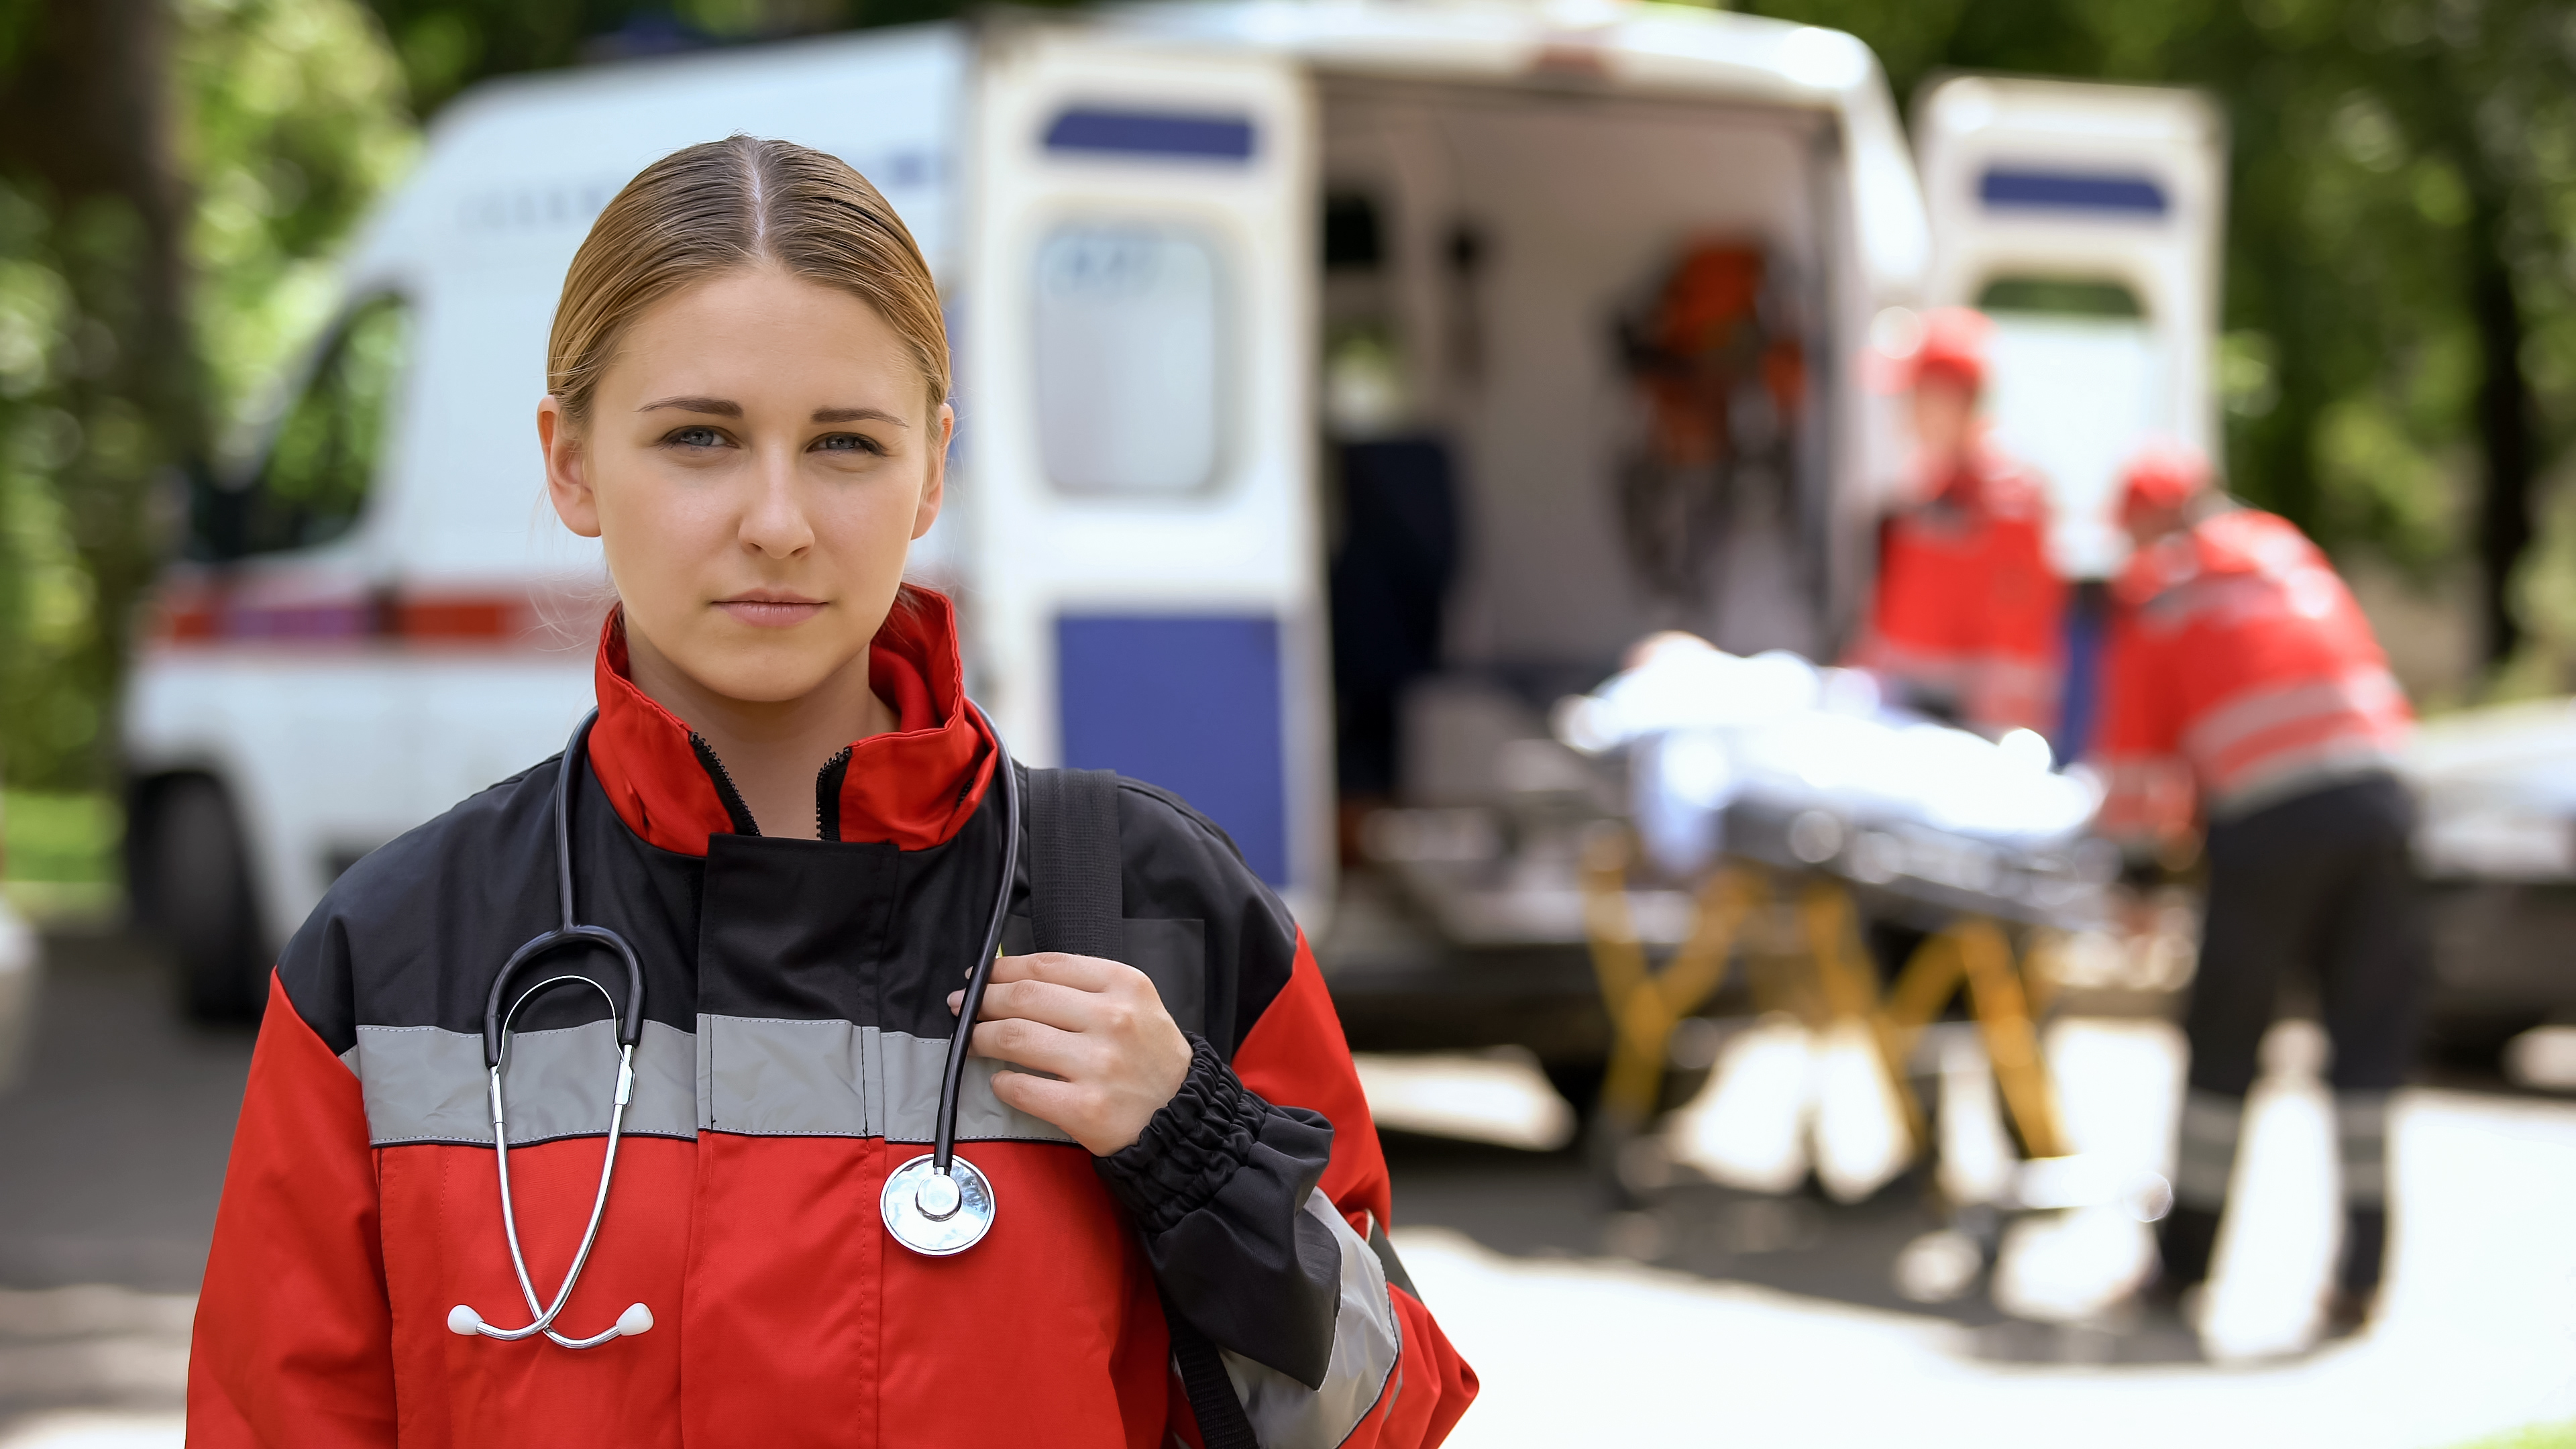 Female paramedic with ambulance in background